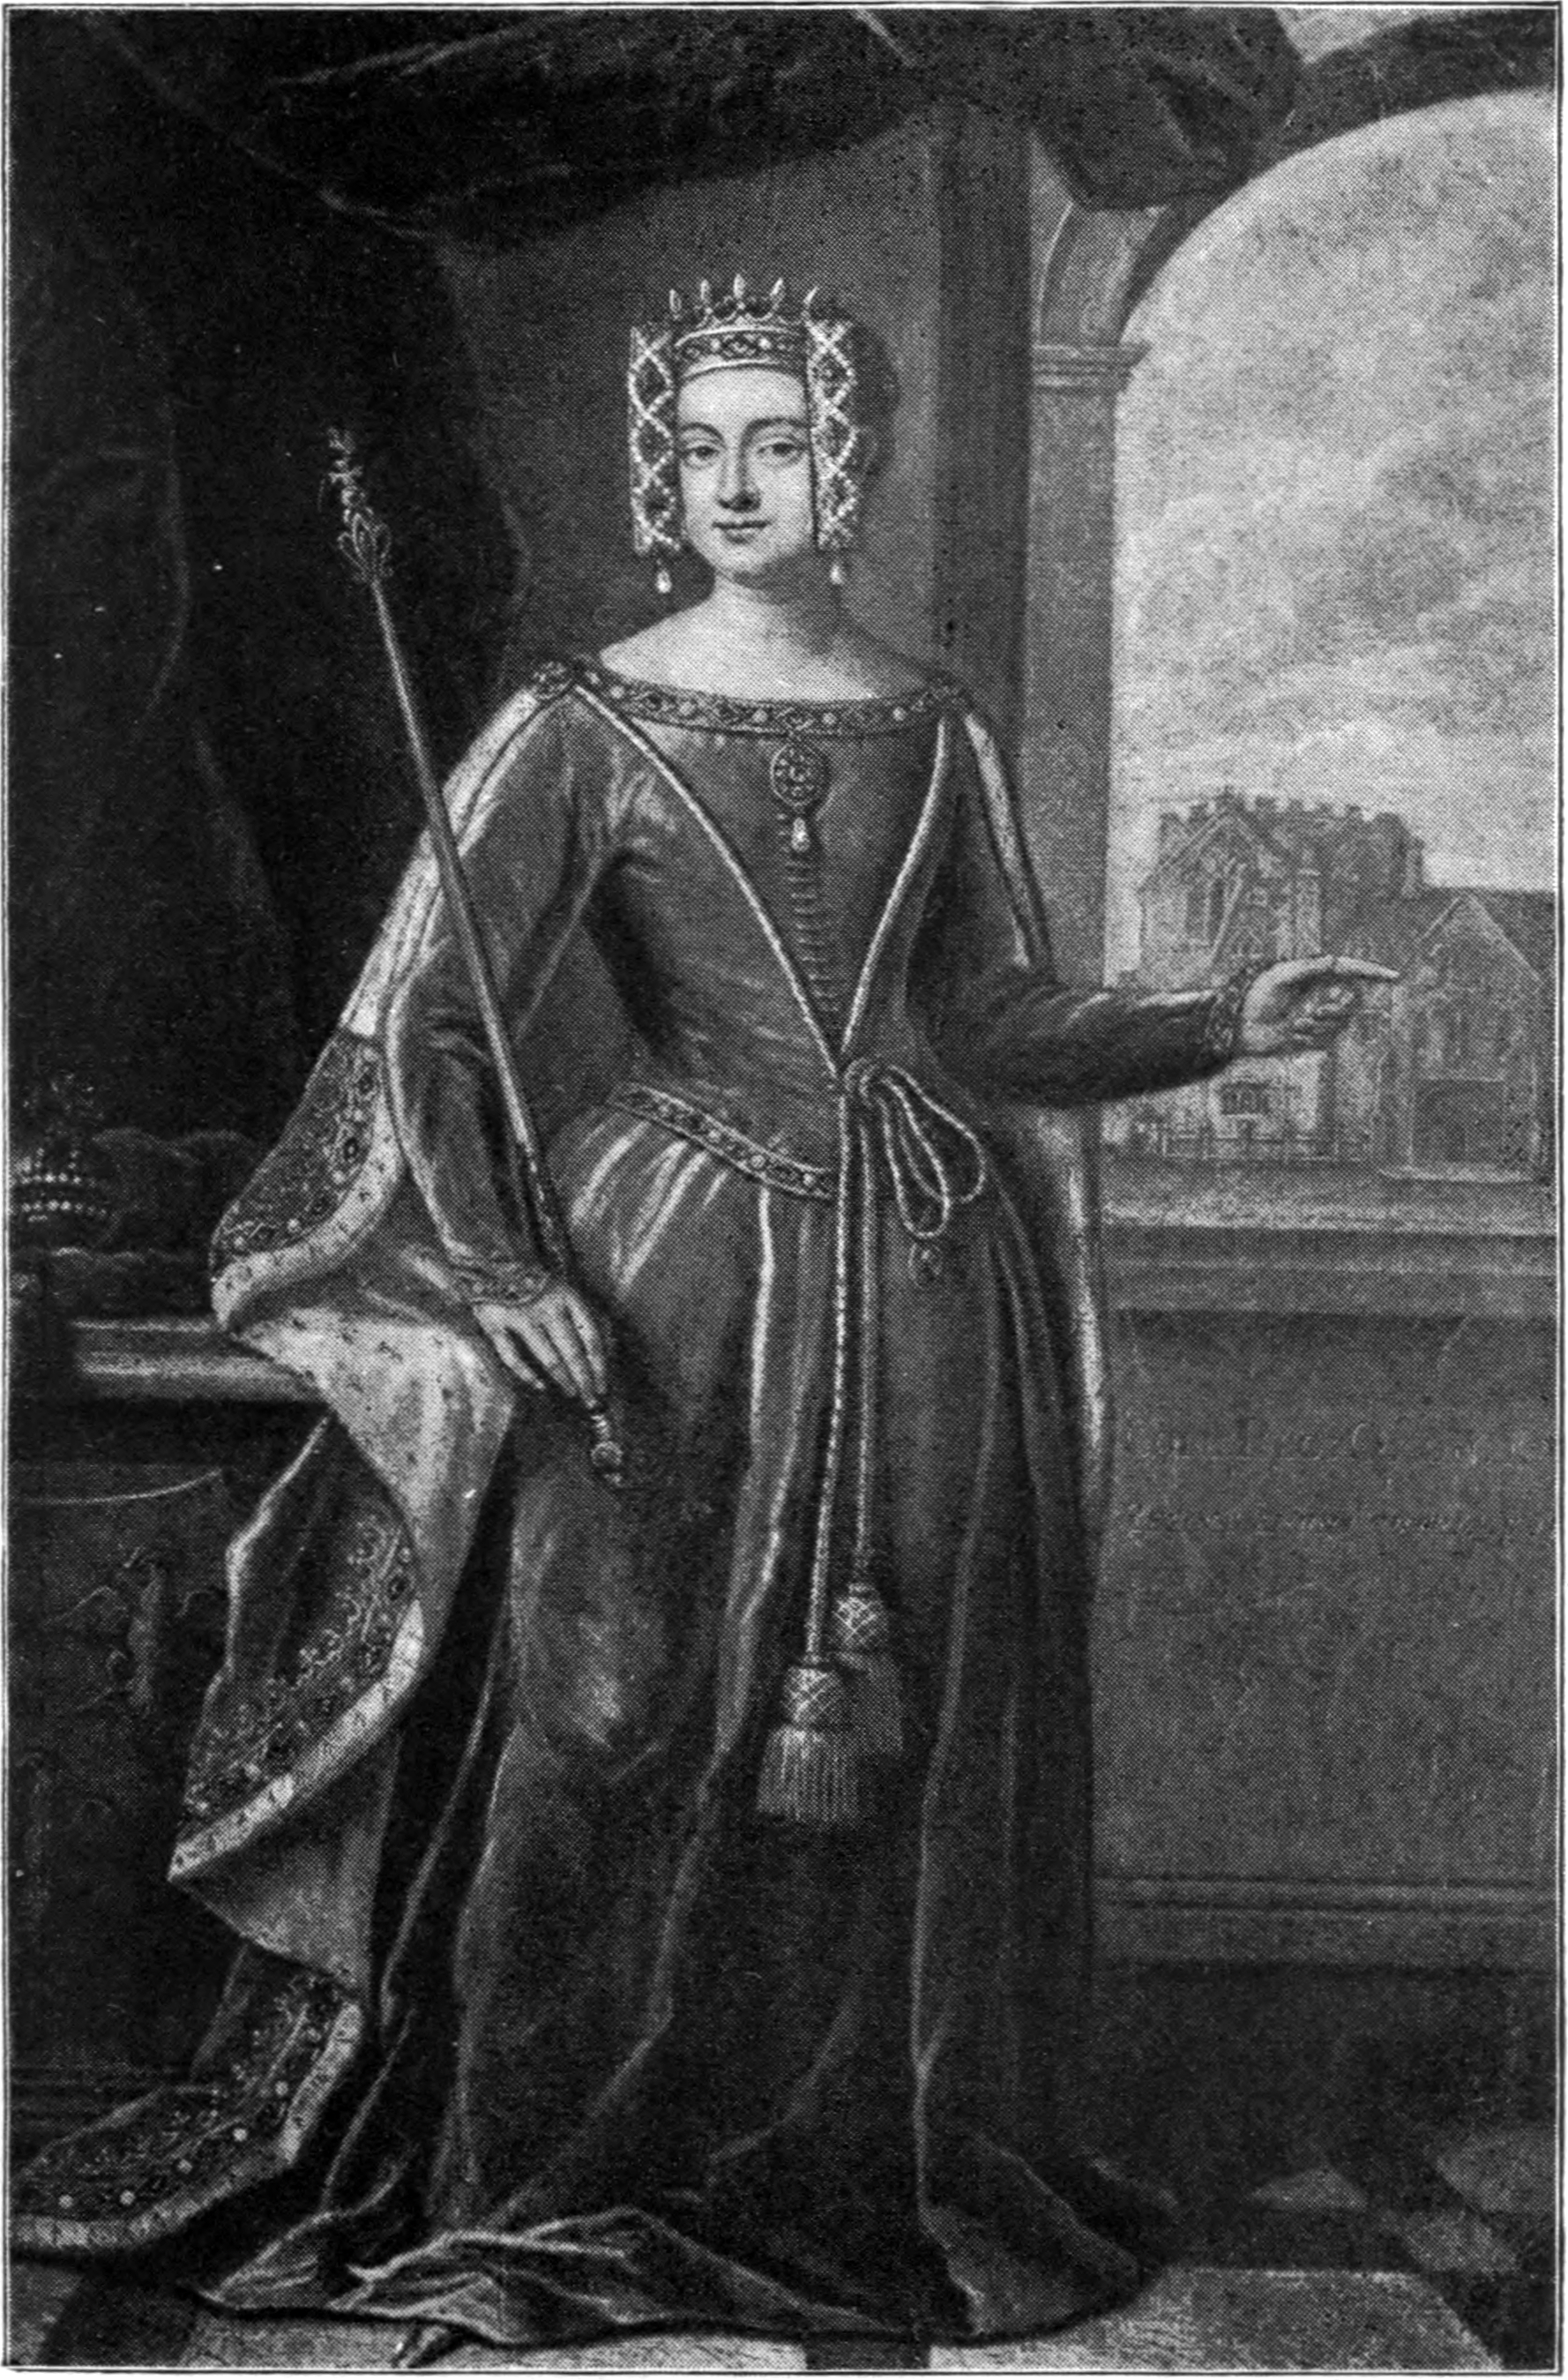 John_Wycliff,_last_of_the_schoolmen_and_first_of_the_English_reformers_-_QUEEN_PHILLIPA,_CONSORT_OF_EDWARD_III